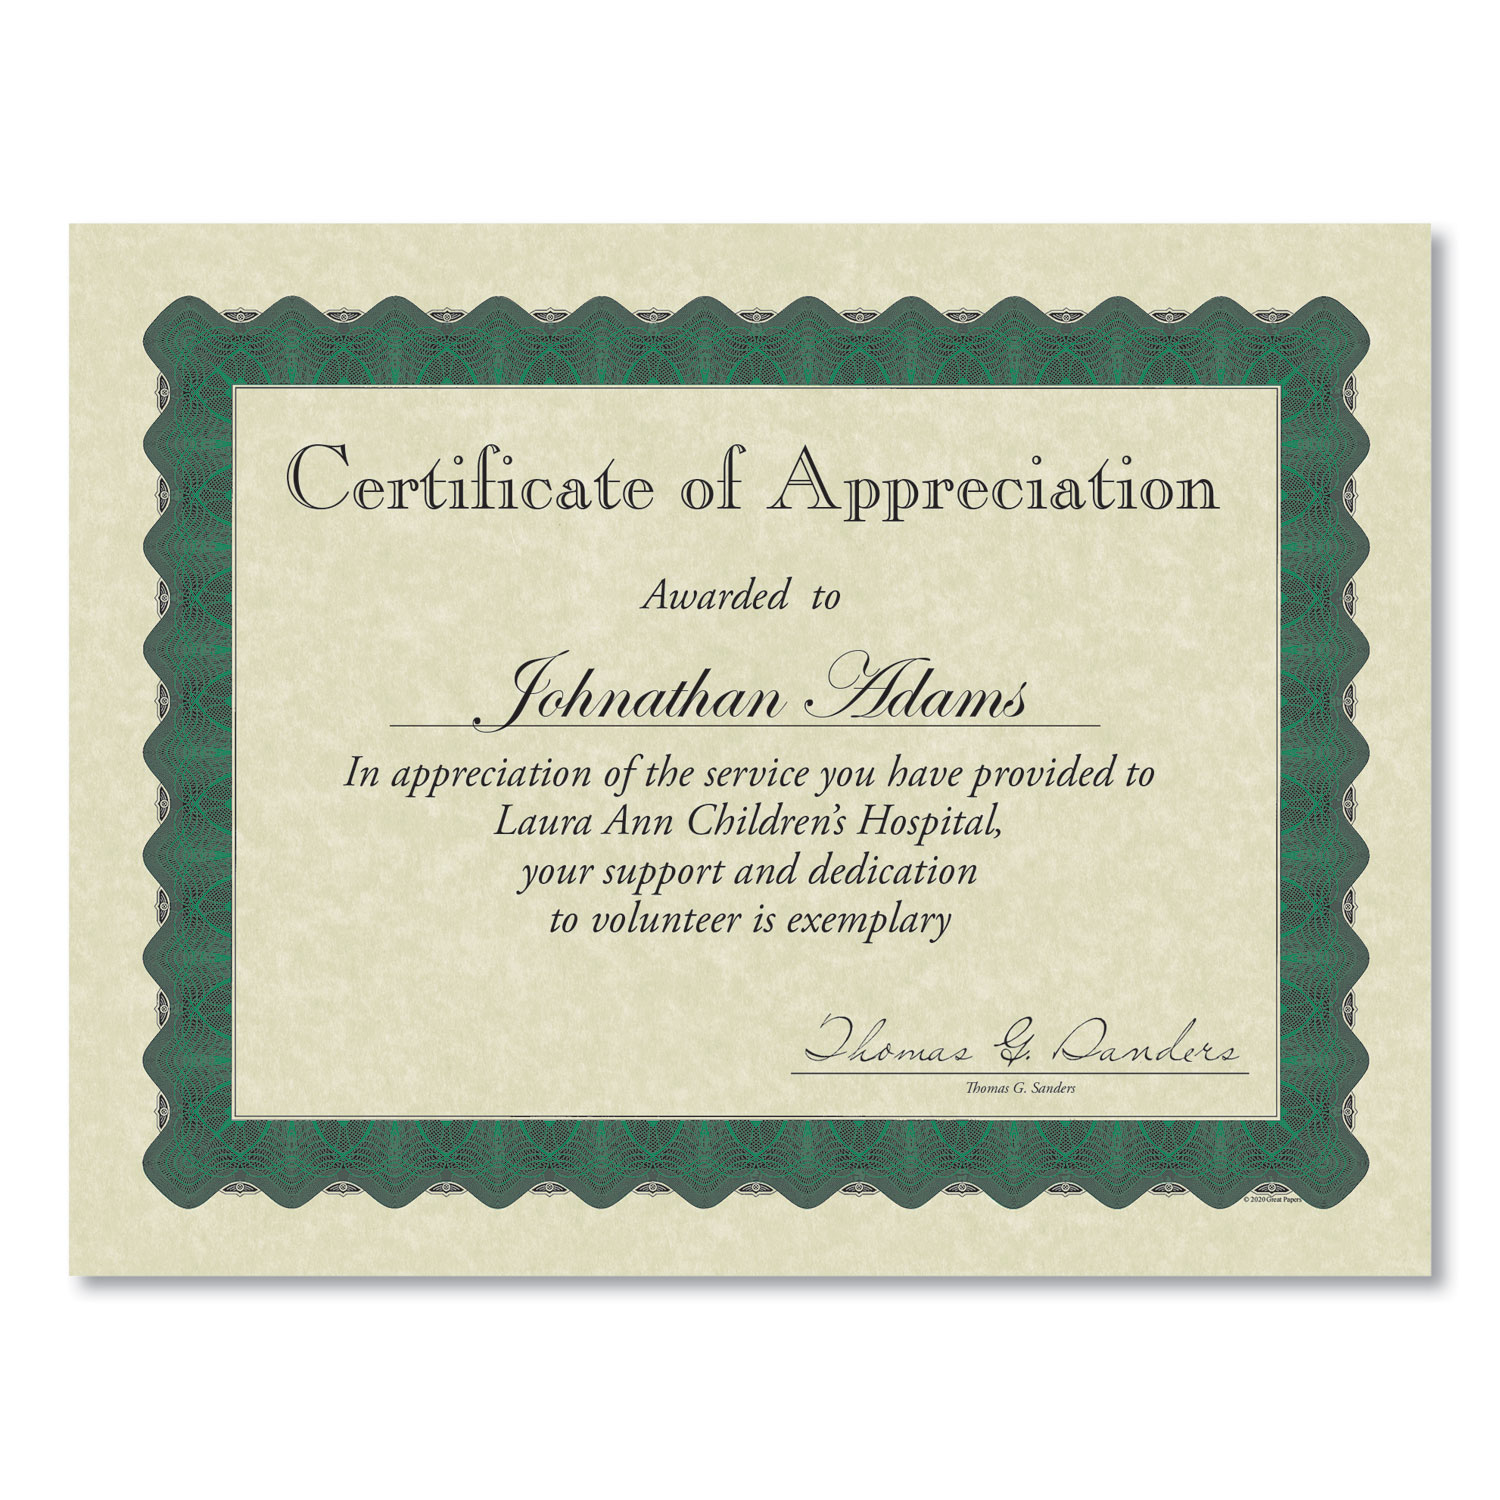 Great Papers!® Metallic Border Certificates, 11 x 8.5, Ivory/Green, 100/Pack